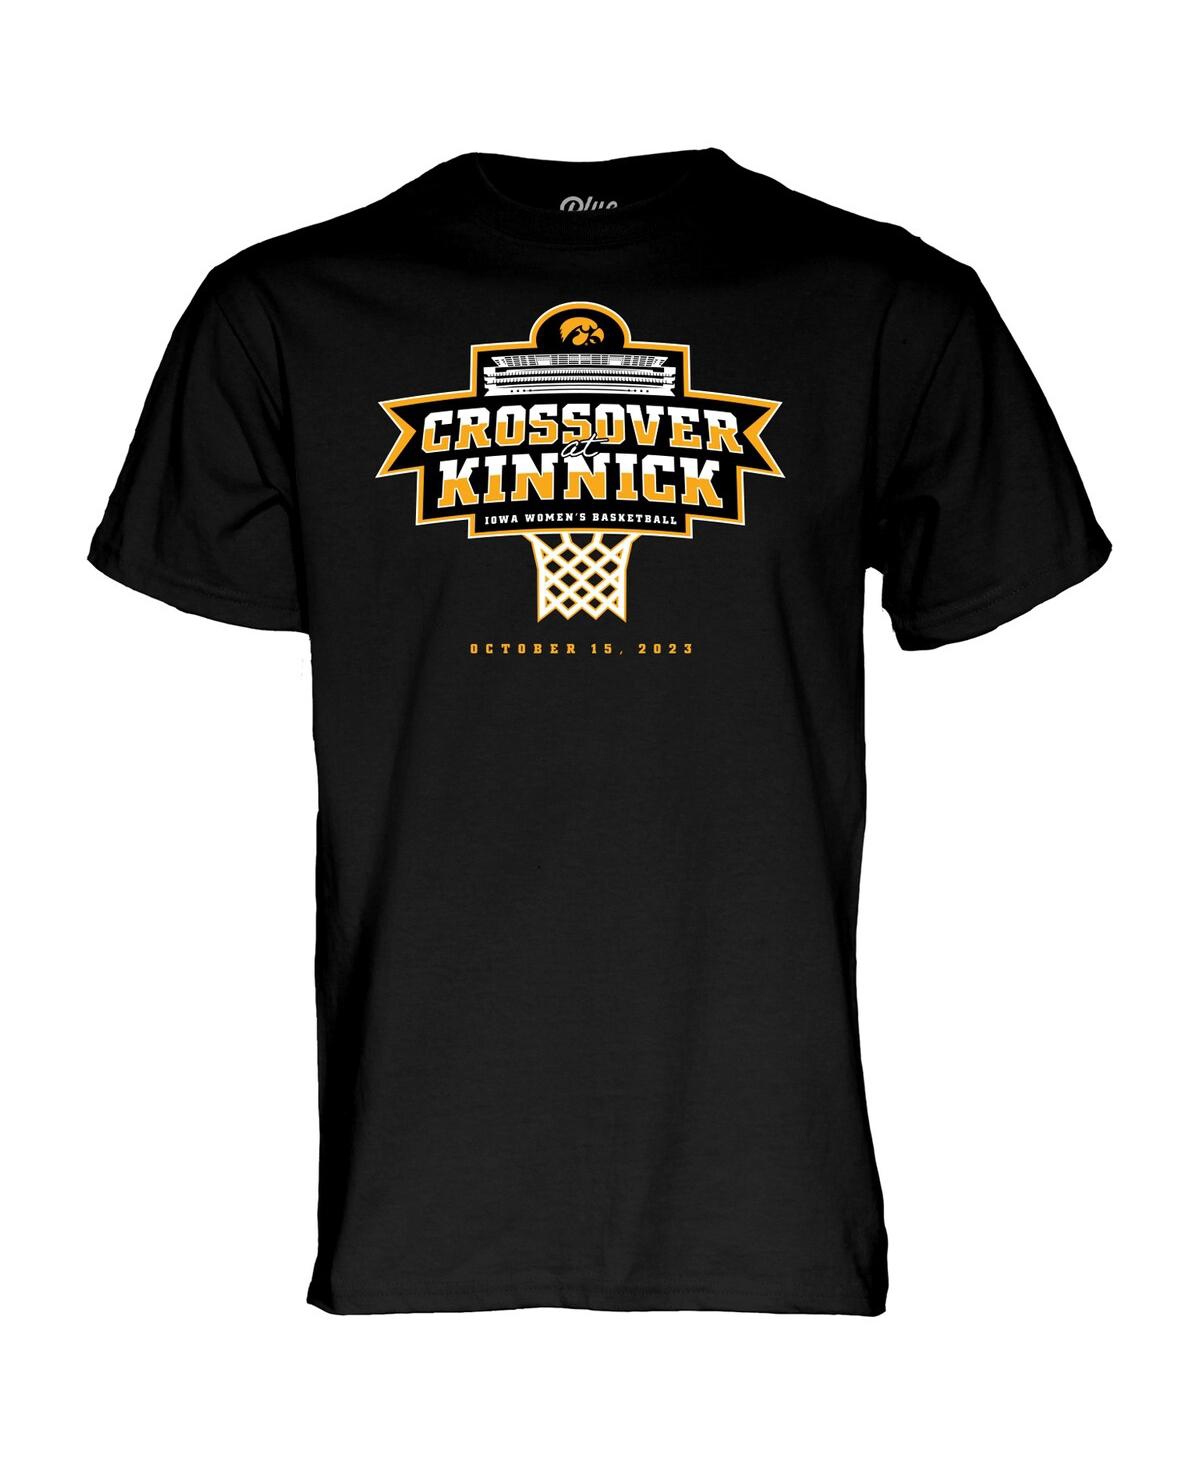 Shop Blue 84 Men's And Women's  Black Iowa Hawkeyes Women's Basketball Crossover At Kinnick T-shirt